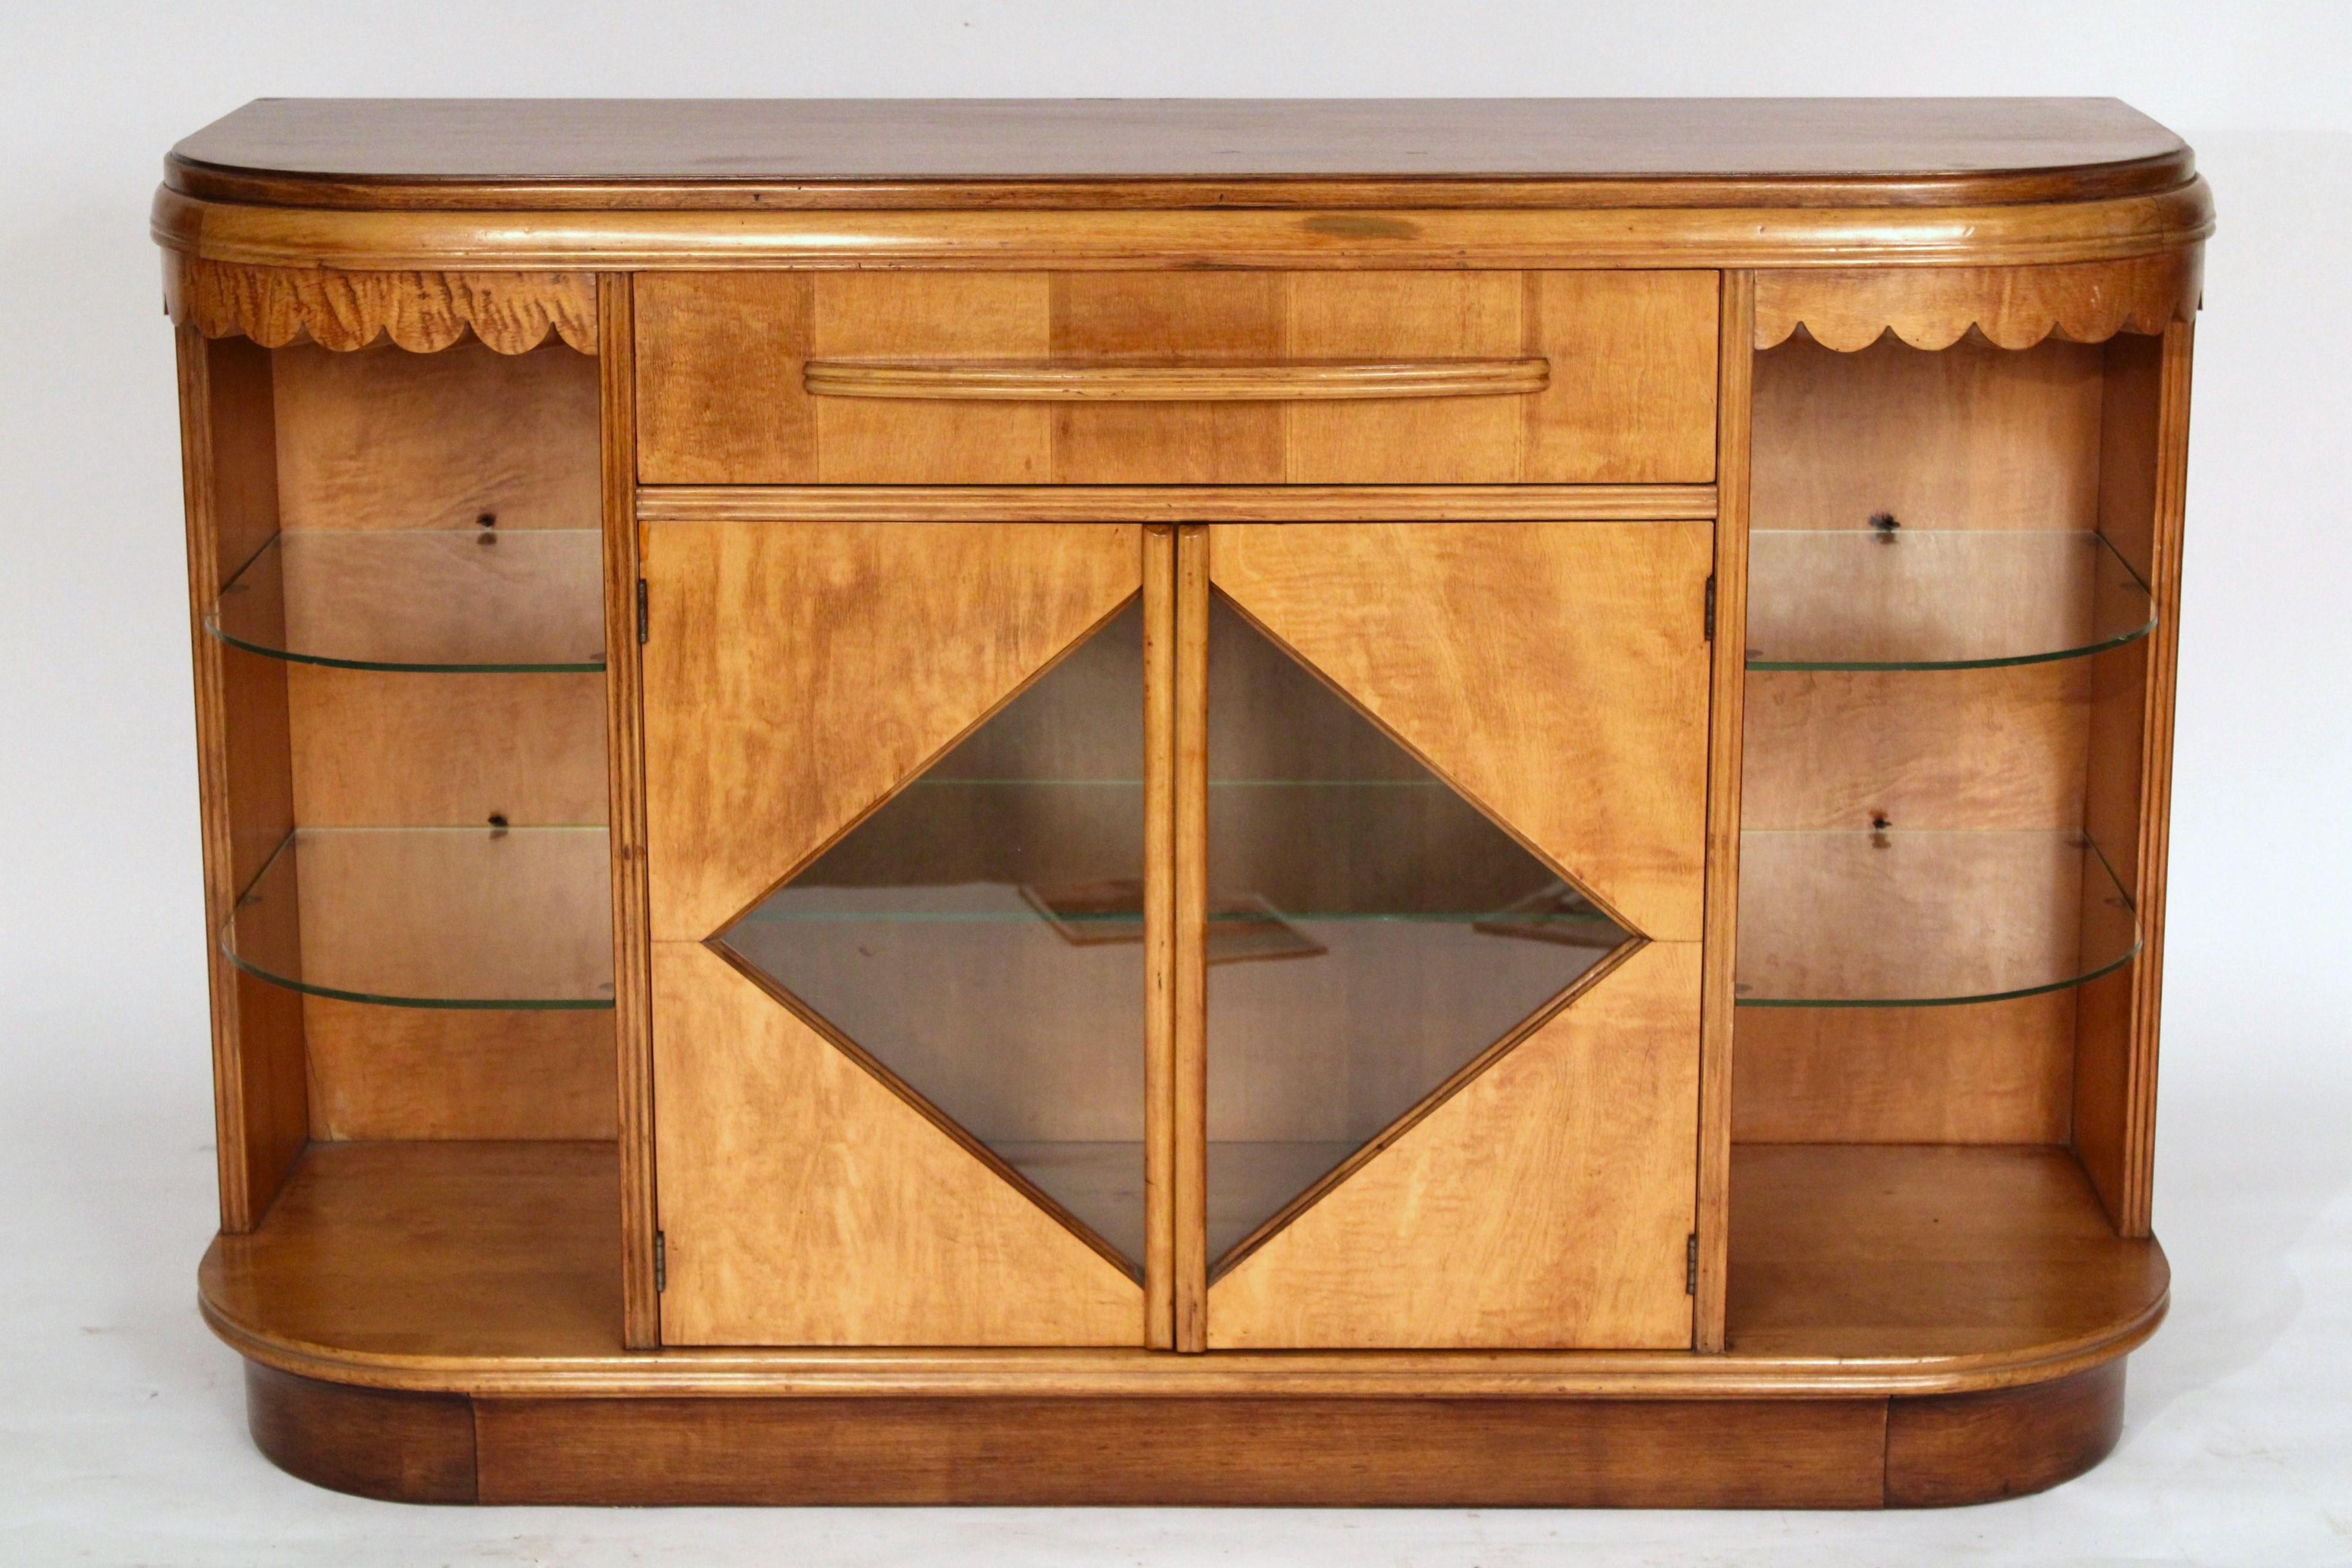 Art Deco mixed wood side cabinet, circa 1950's. With an elongated demi lune shaped  top, a central drawer over two doors with diamond shaped glass doors, sides with 2 glass shelves on each side, resting on a recessed walnut base. The woods used on